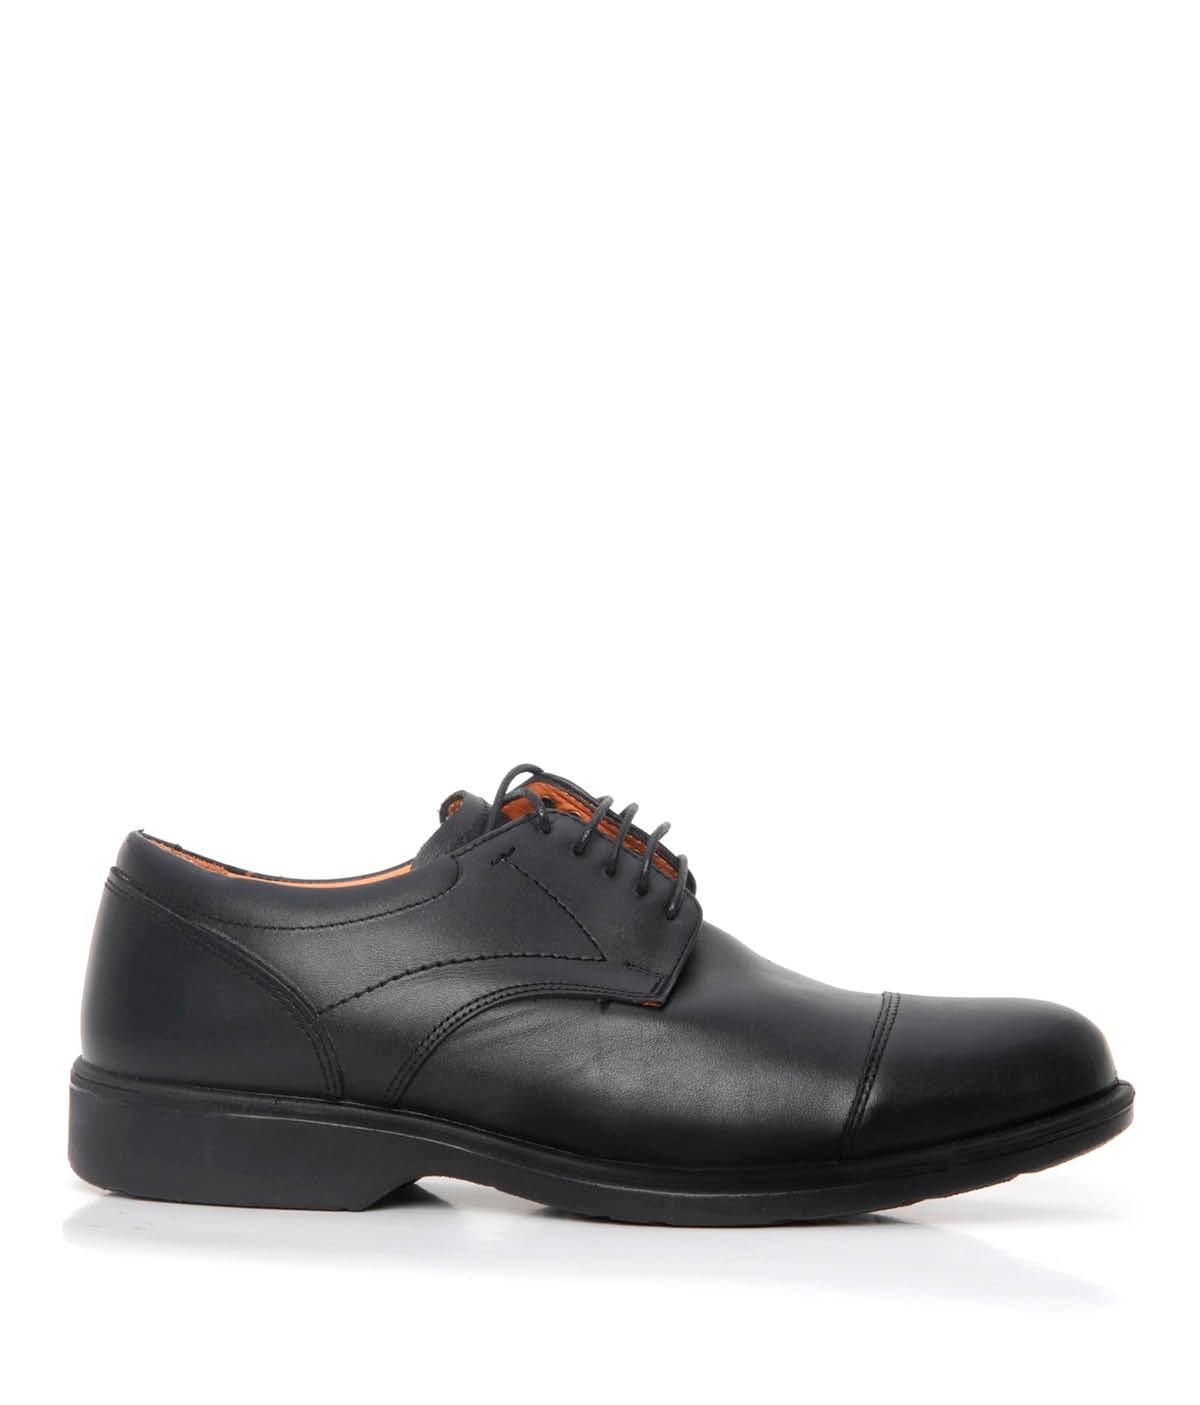 DIPLOMAT 01 GENUINE LEATHER WORK SHOES